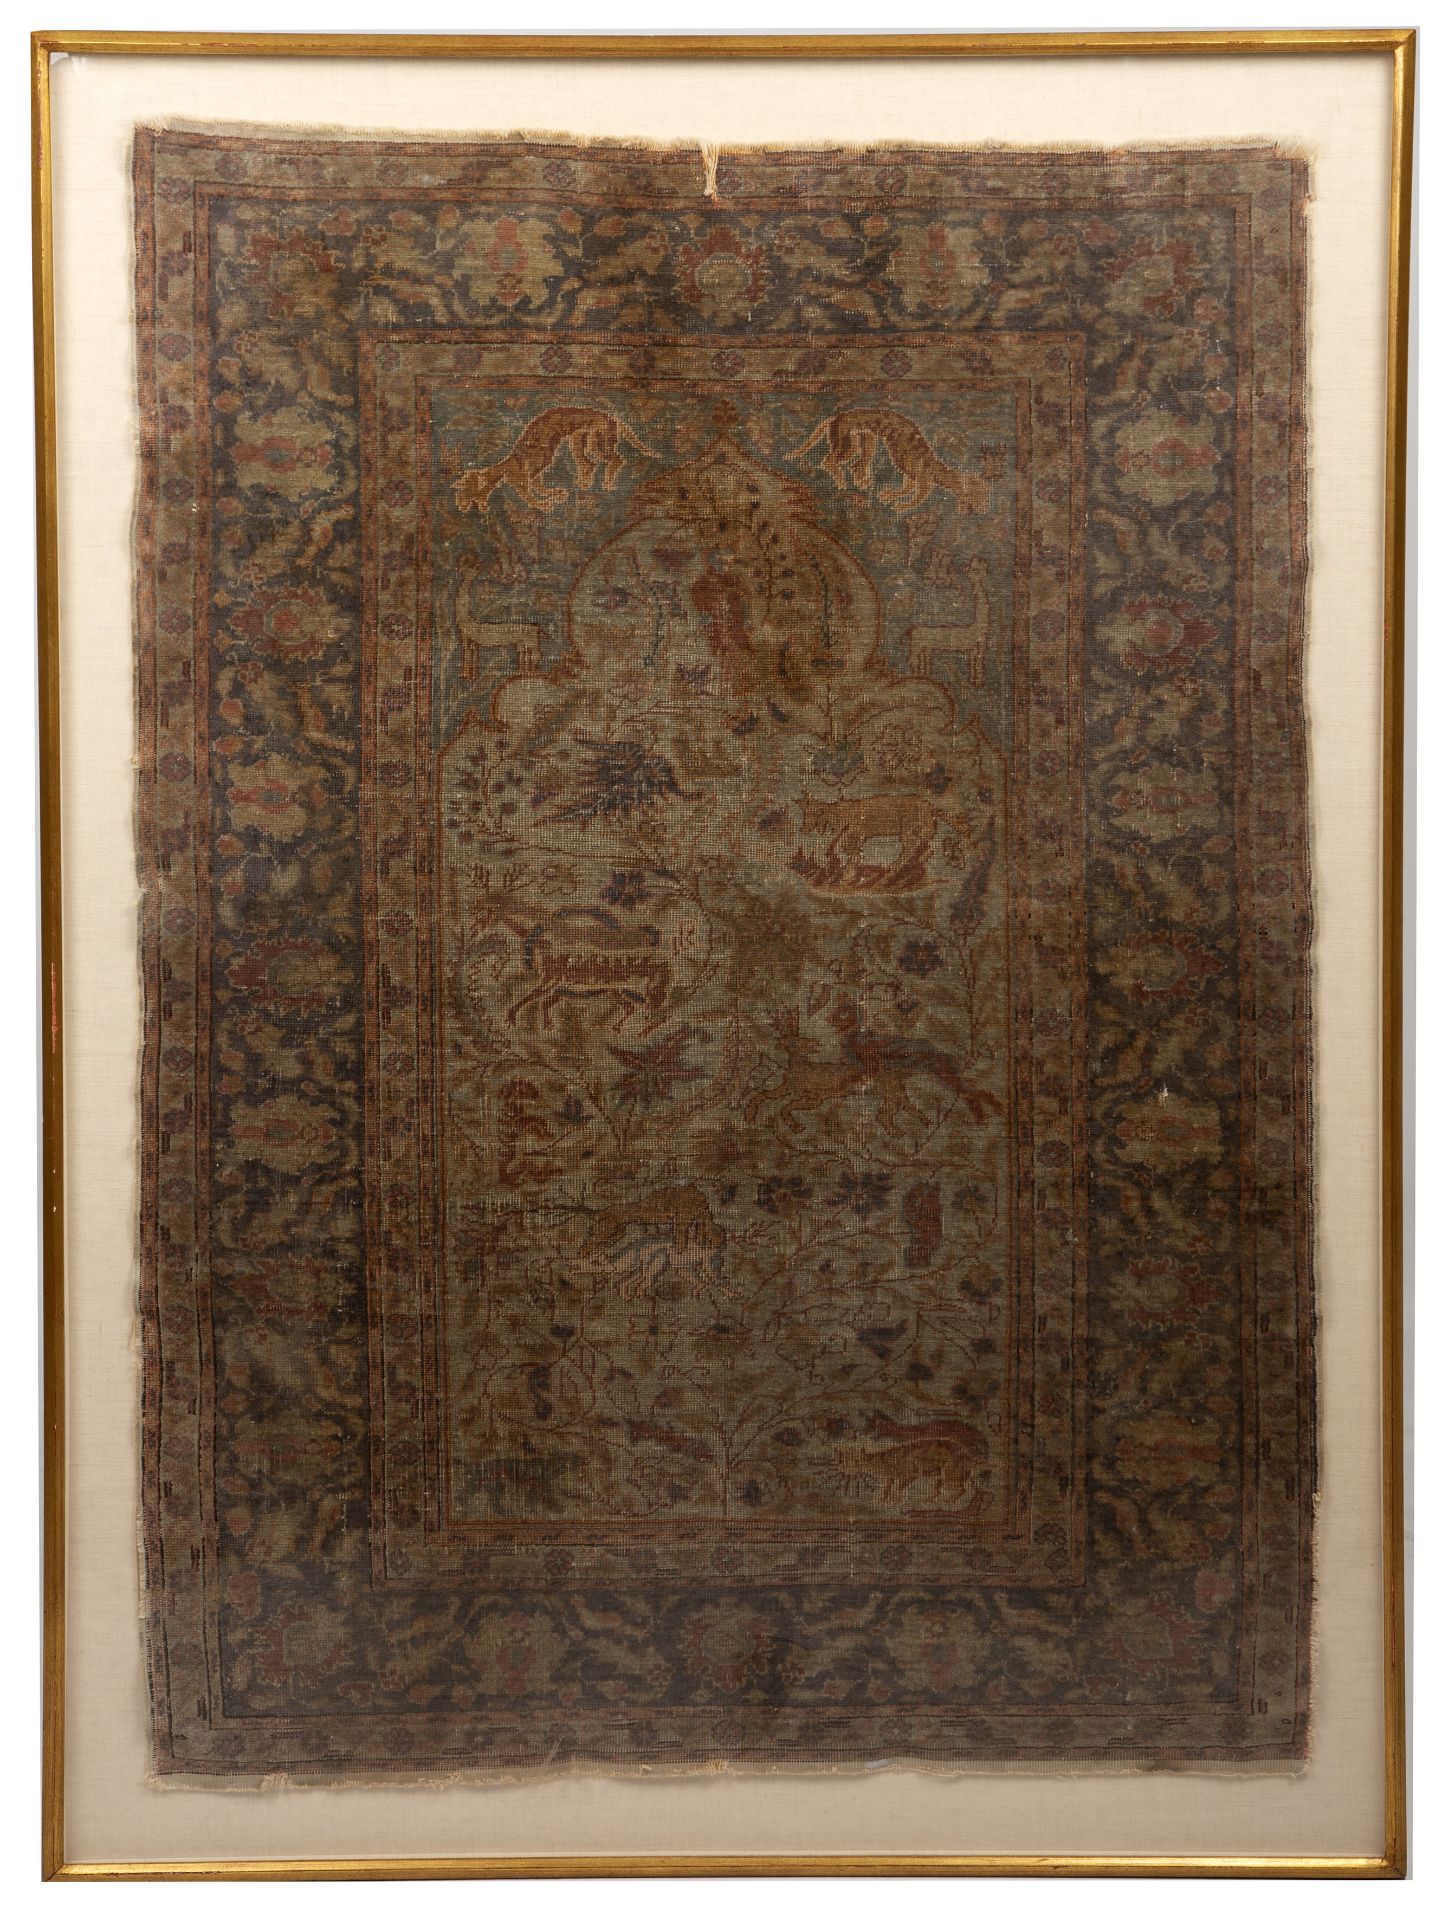 An antique Persian rug decorated with flora and fauna 80cm x 110cm - Image 2 of 2